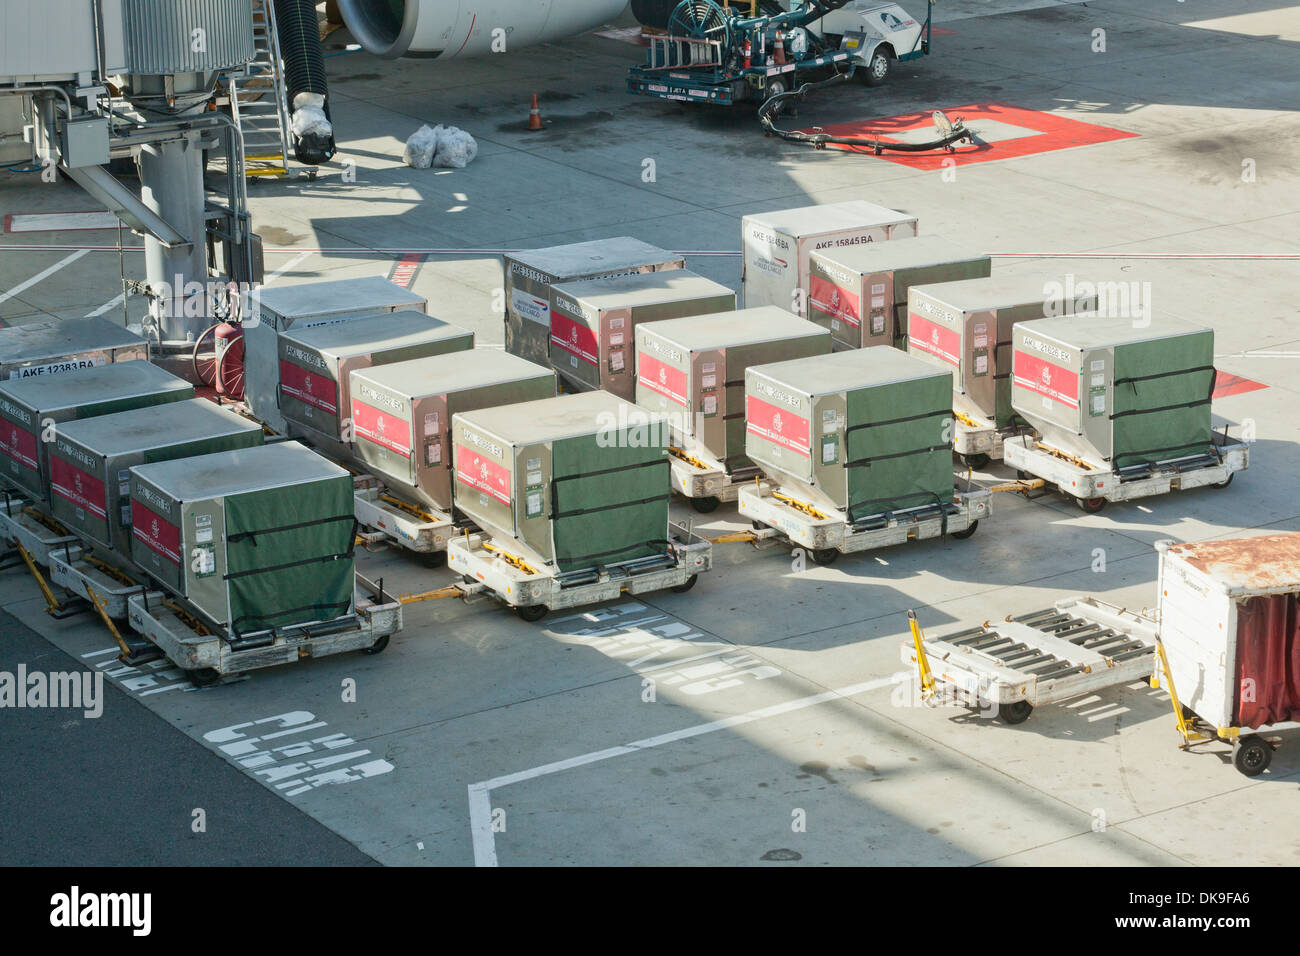 Commercial airline unit load device (ULD) containers at airport Stock Photo